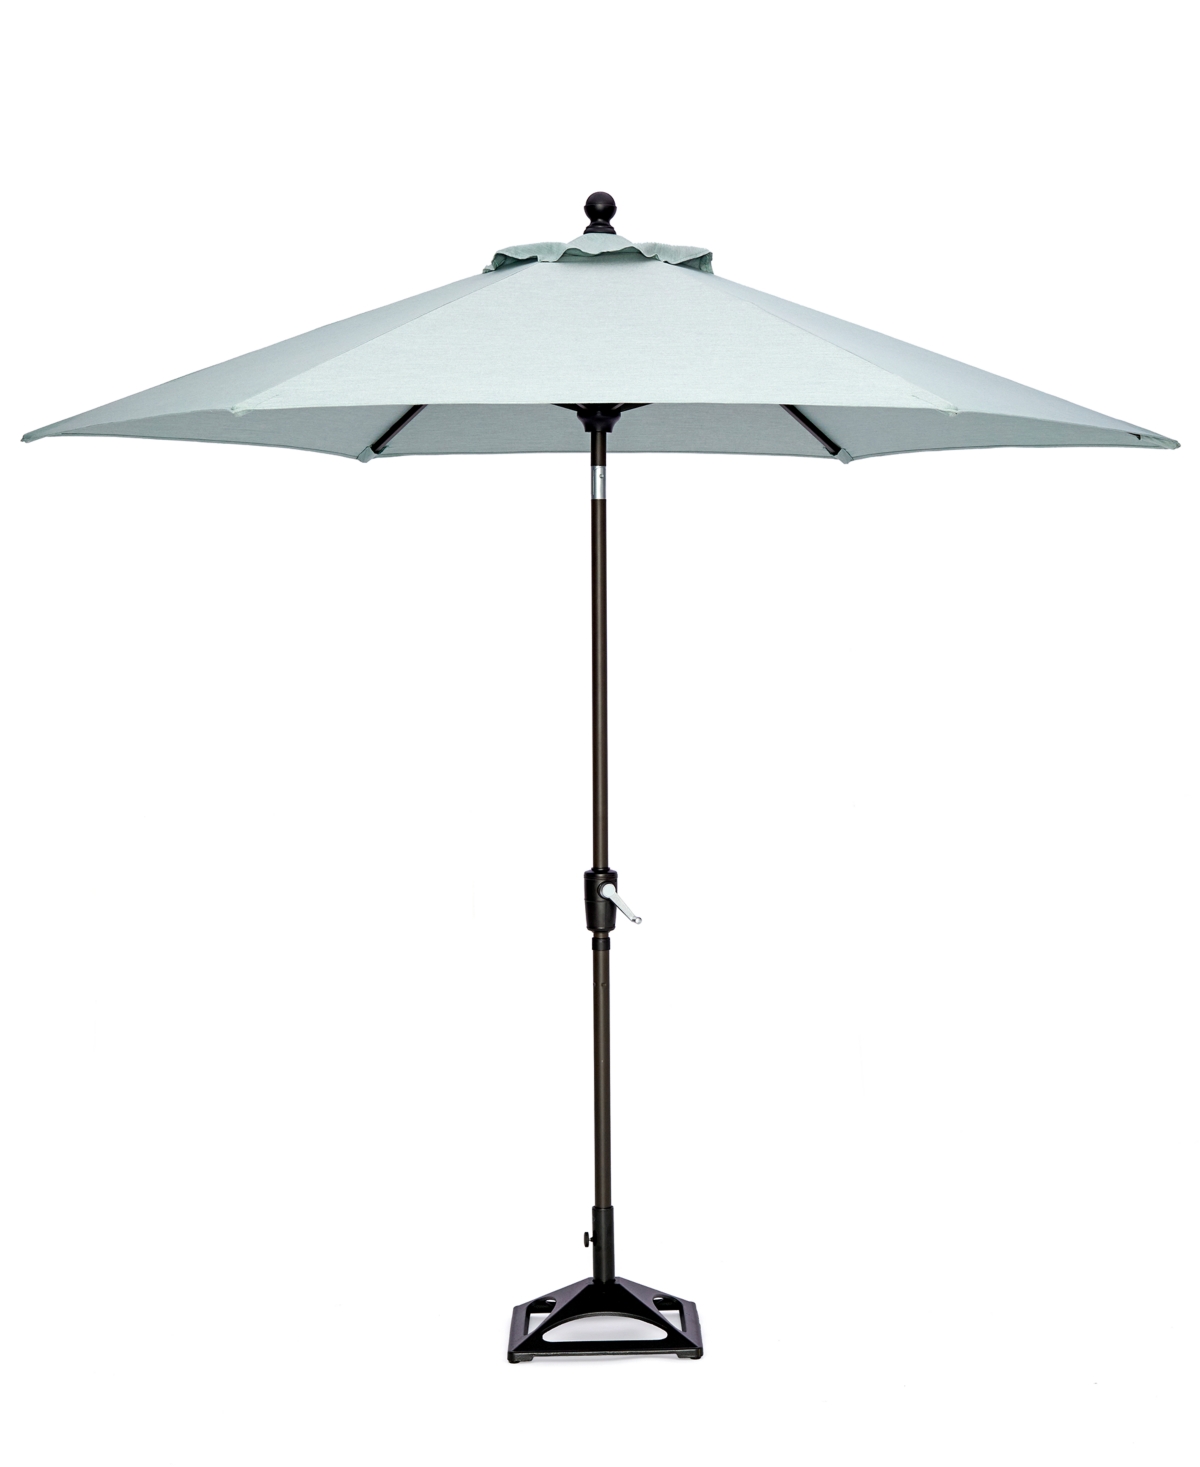 Stockholm Outdoor 9 Umbrella with Outdoor Fabric and Base, Created for Macys